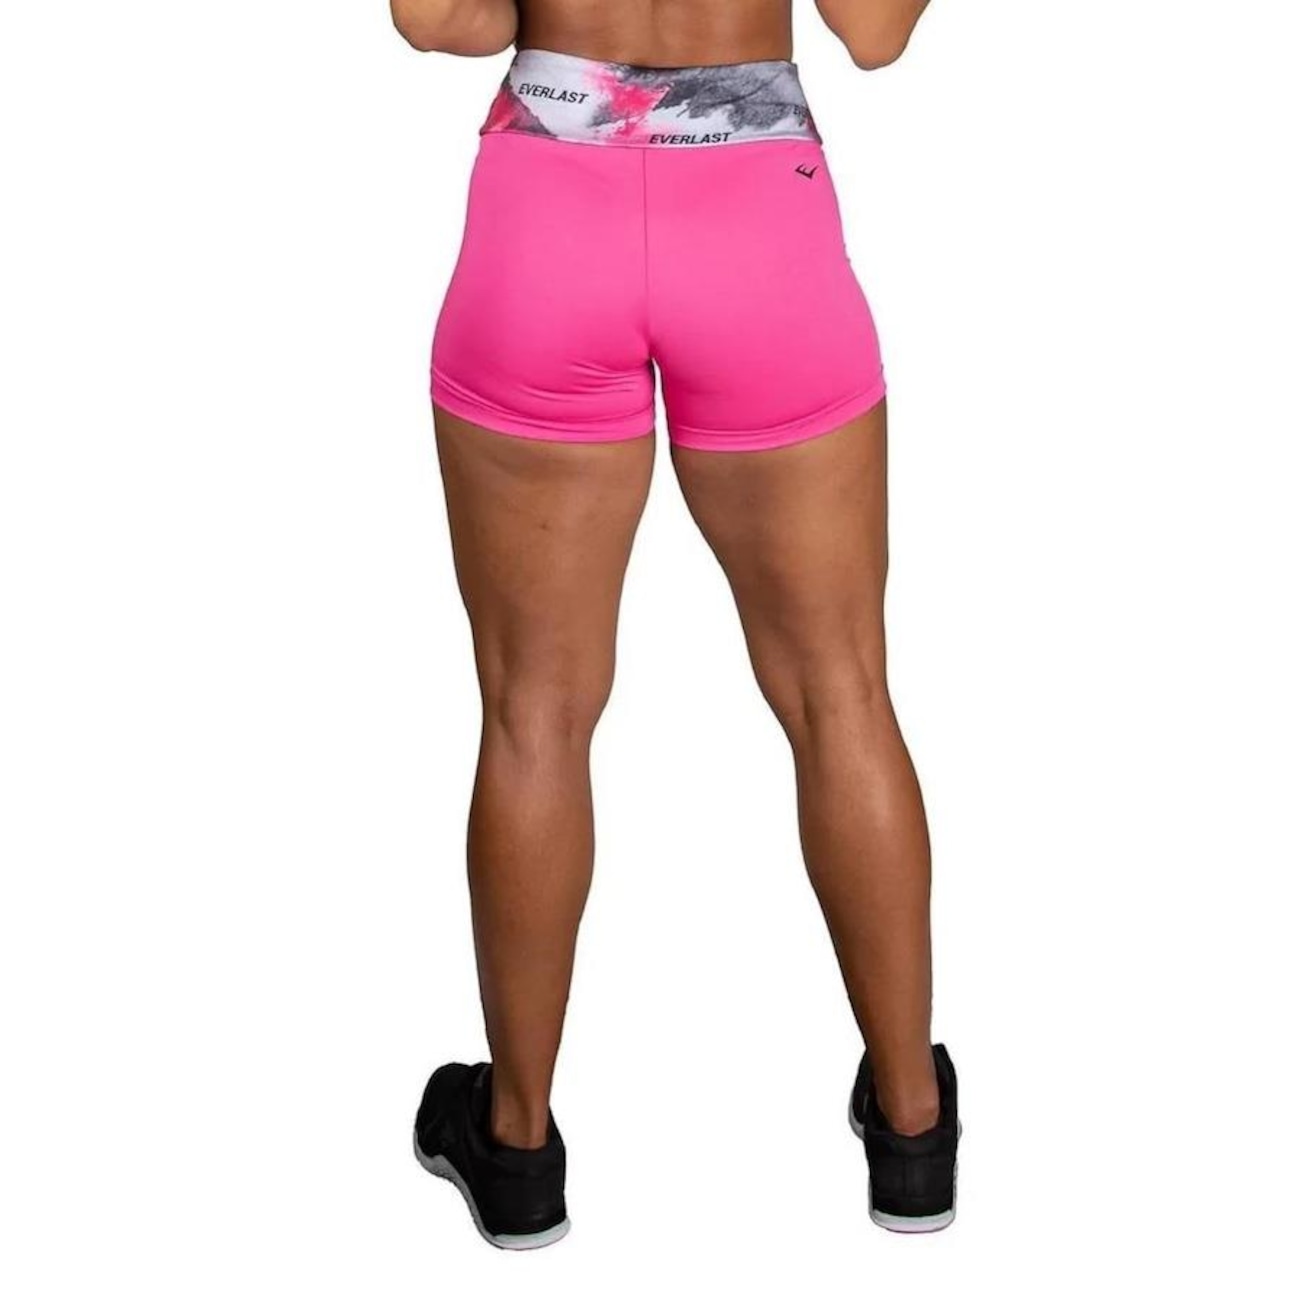 LADIES’ EVERLAST ATHLETIC SHORTS, PINK, SIZE SMALL